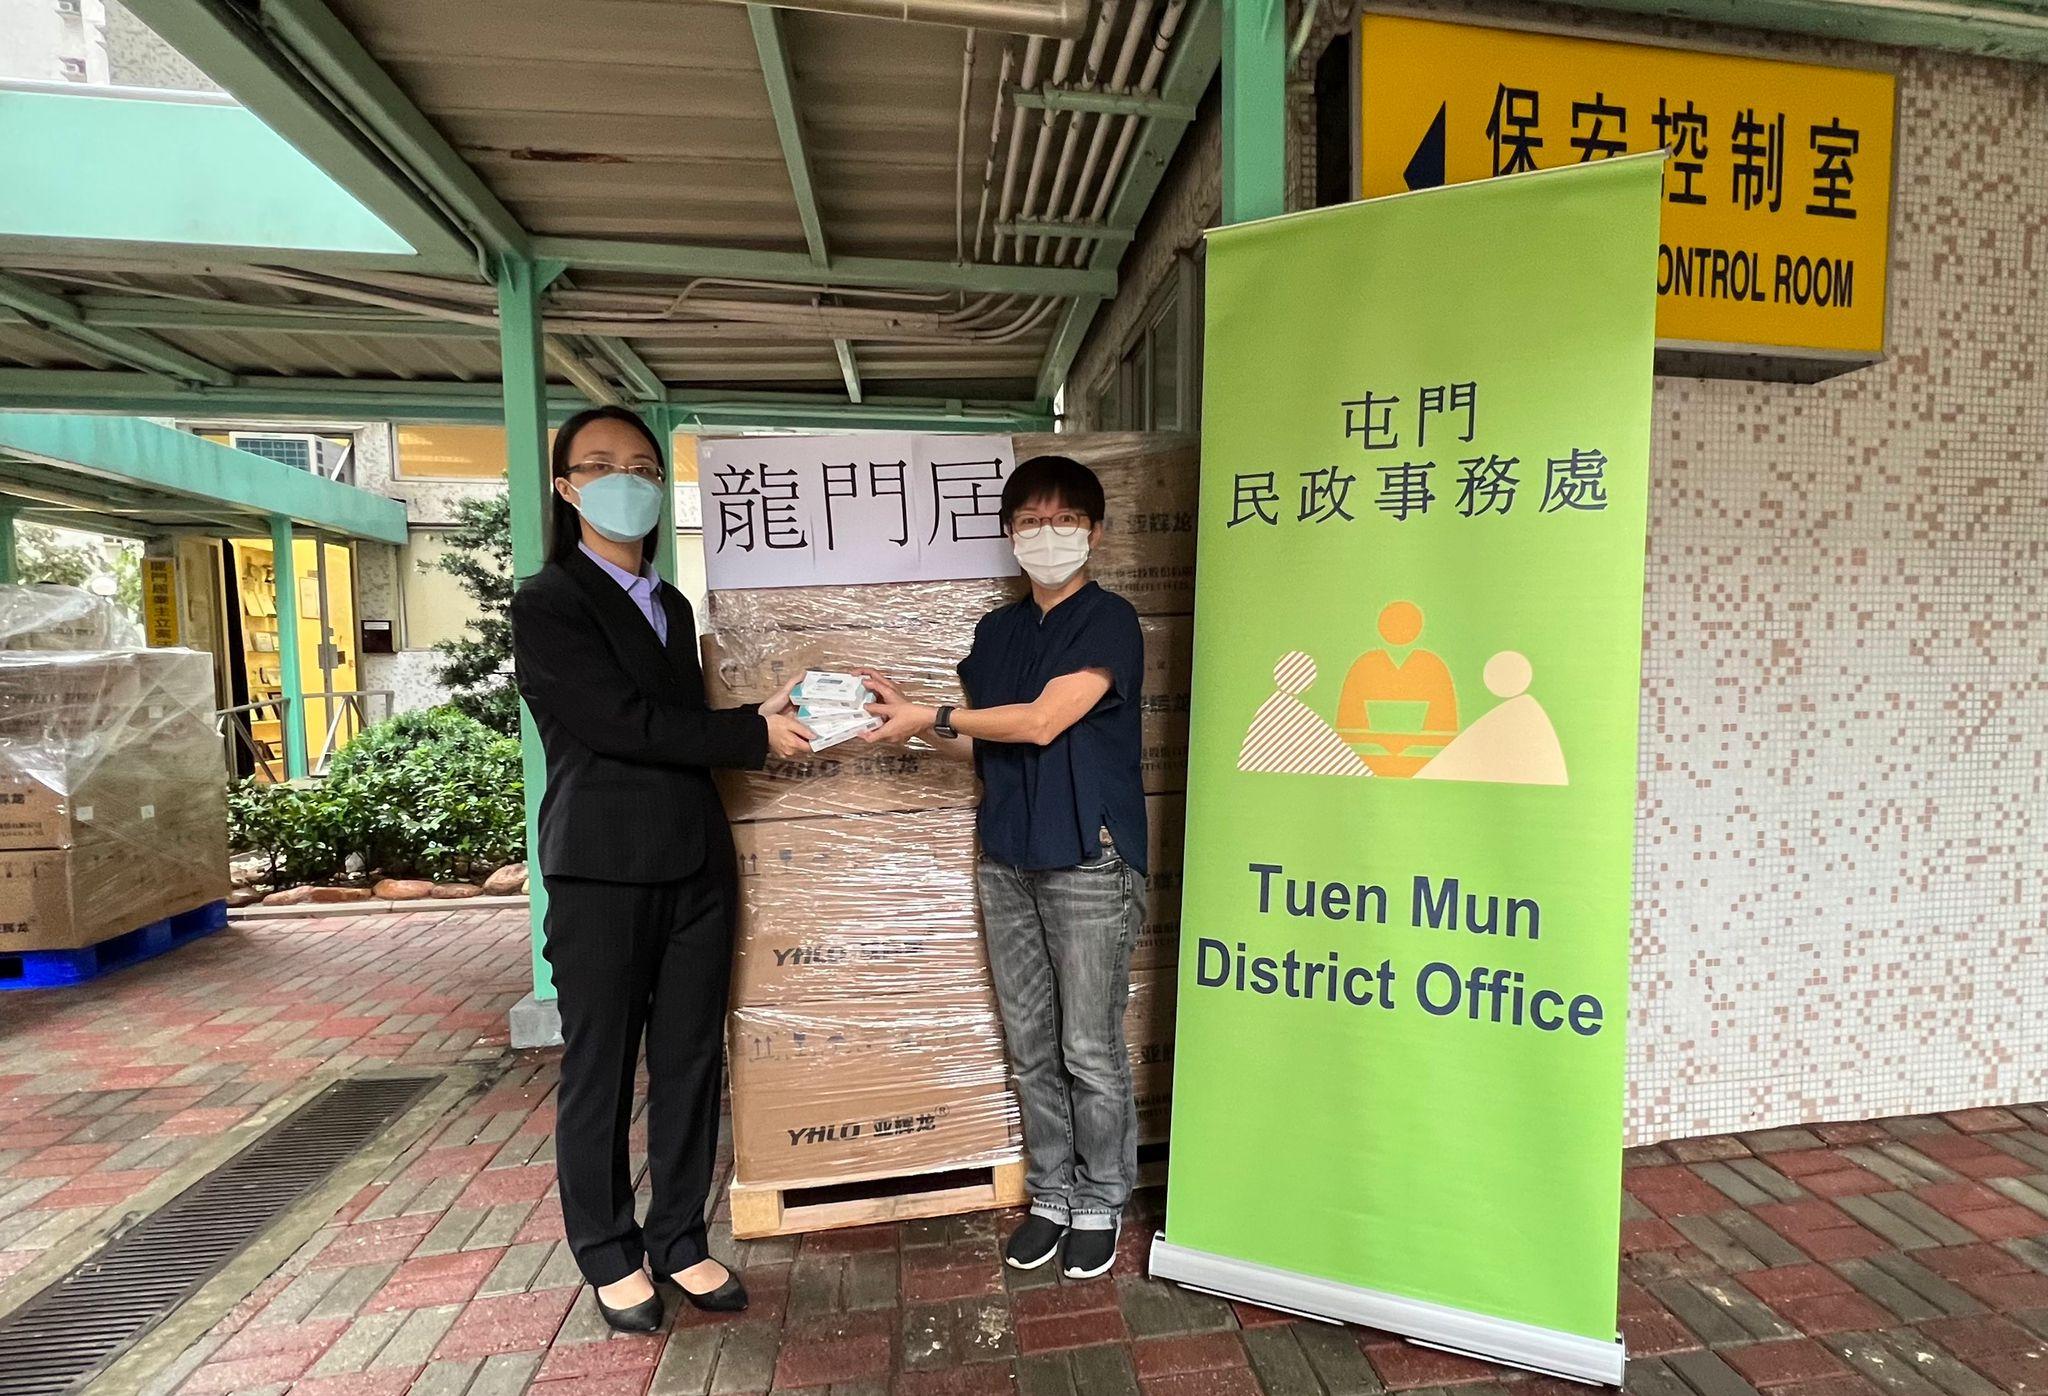 The Tuen Mun District Office today (May 28) distributed COVID-19 rapid test kits to households, cleansing workers and property management staff living and working in Lung Mun Oasis for voluntary testing through the property management company.